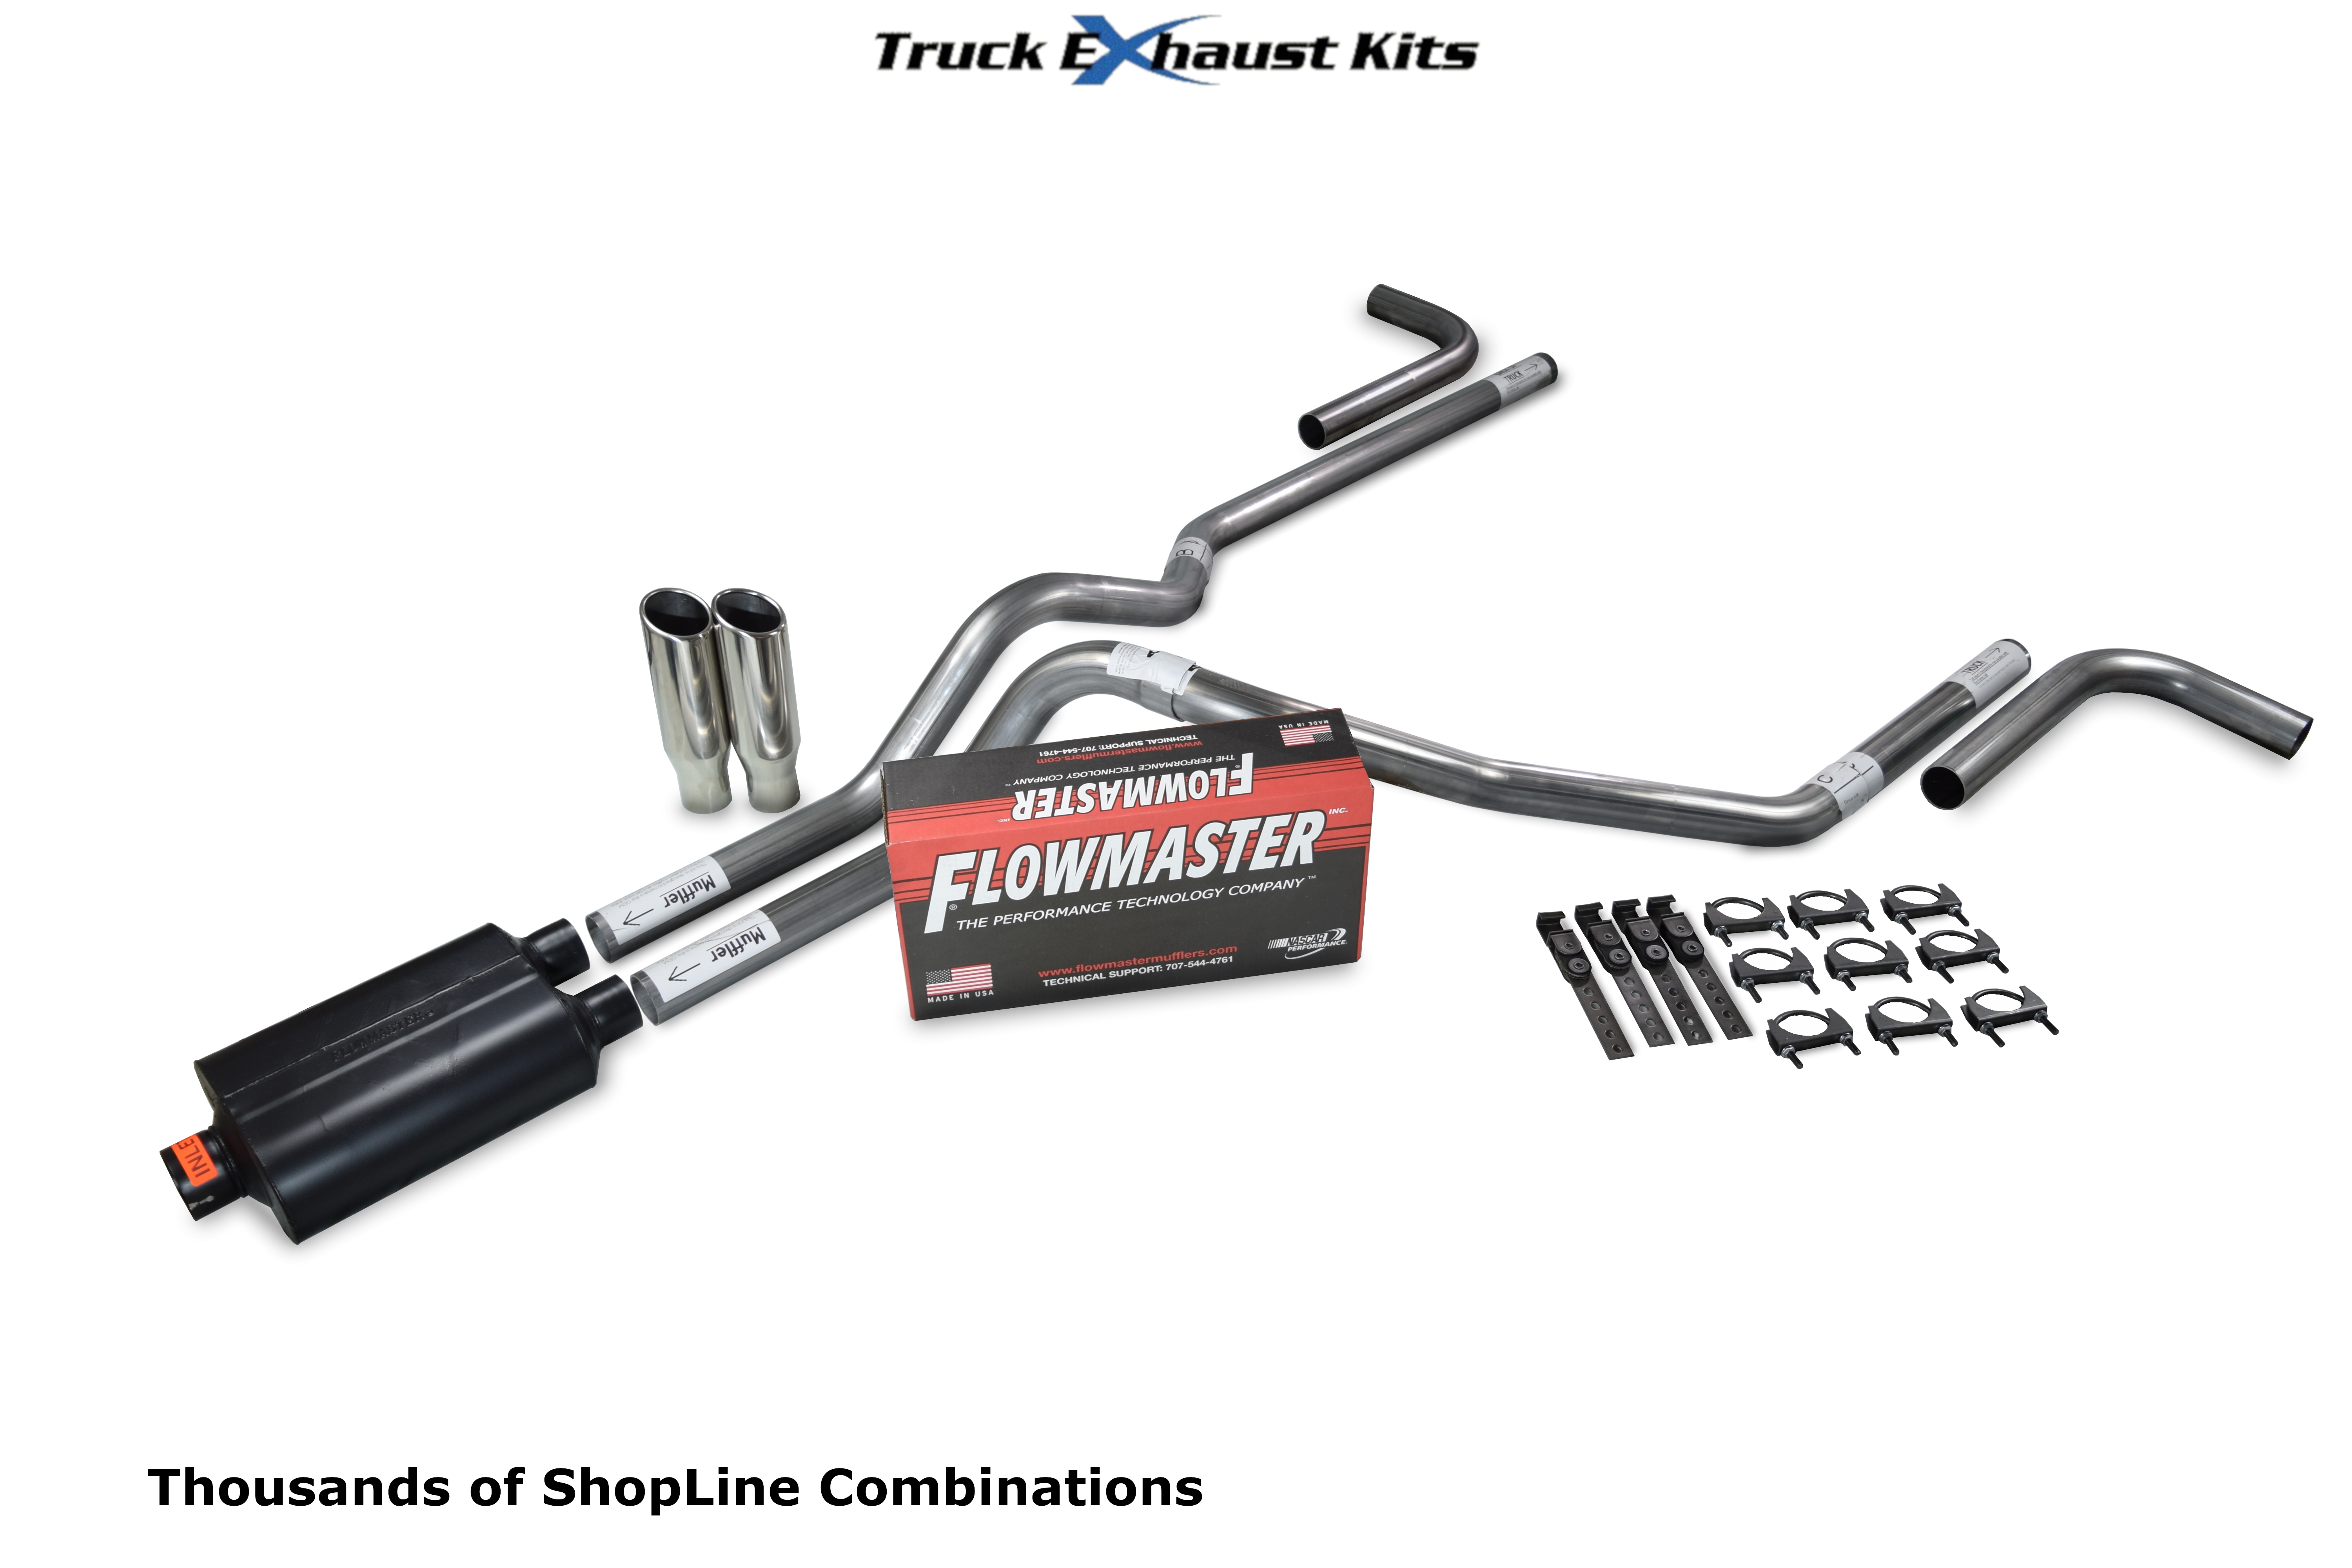 Truck Exhaust Kits DIY dual exhaust system 2.25 MA pipe Flowmaster Super 10